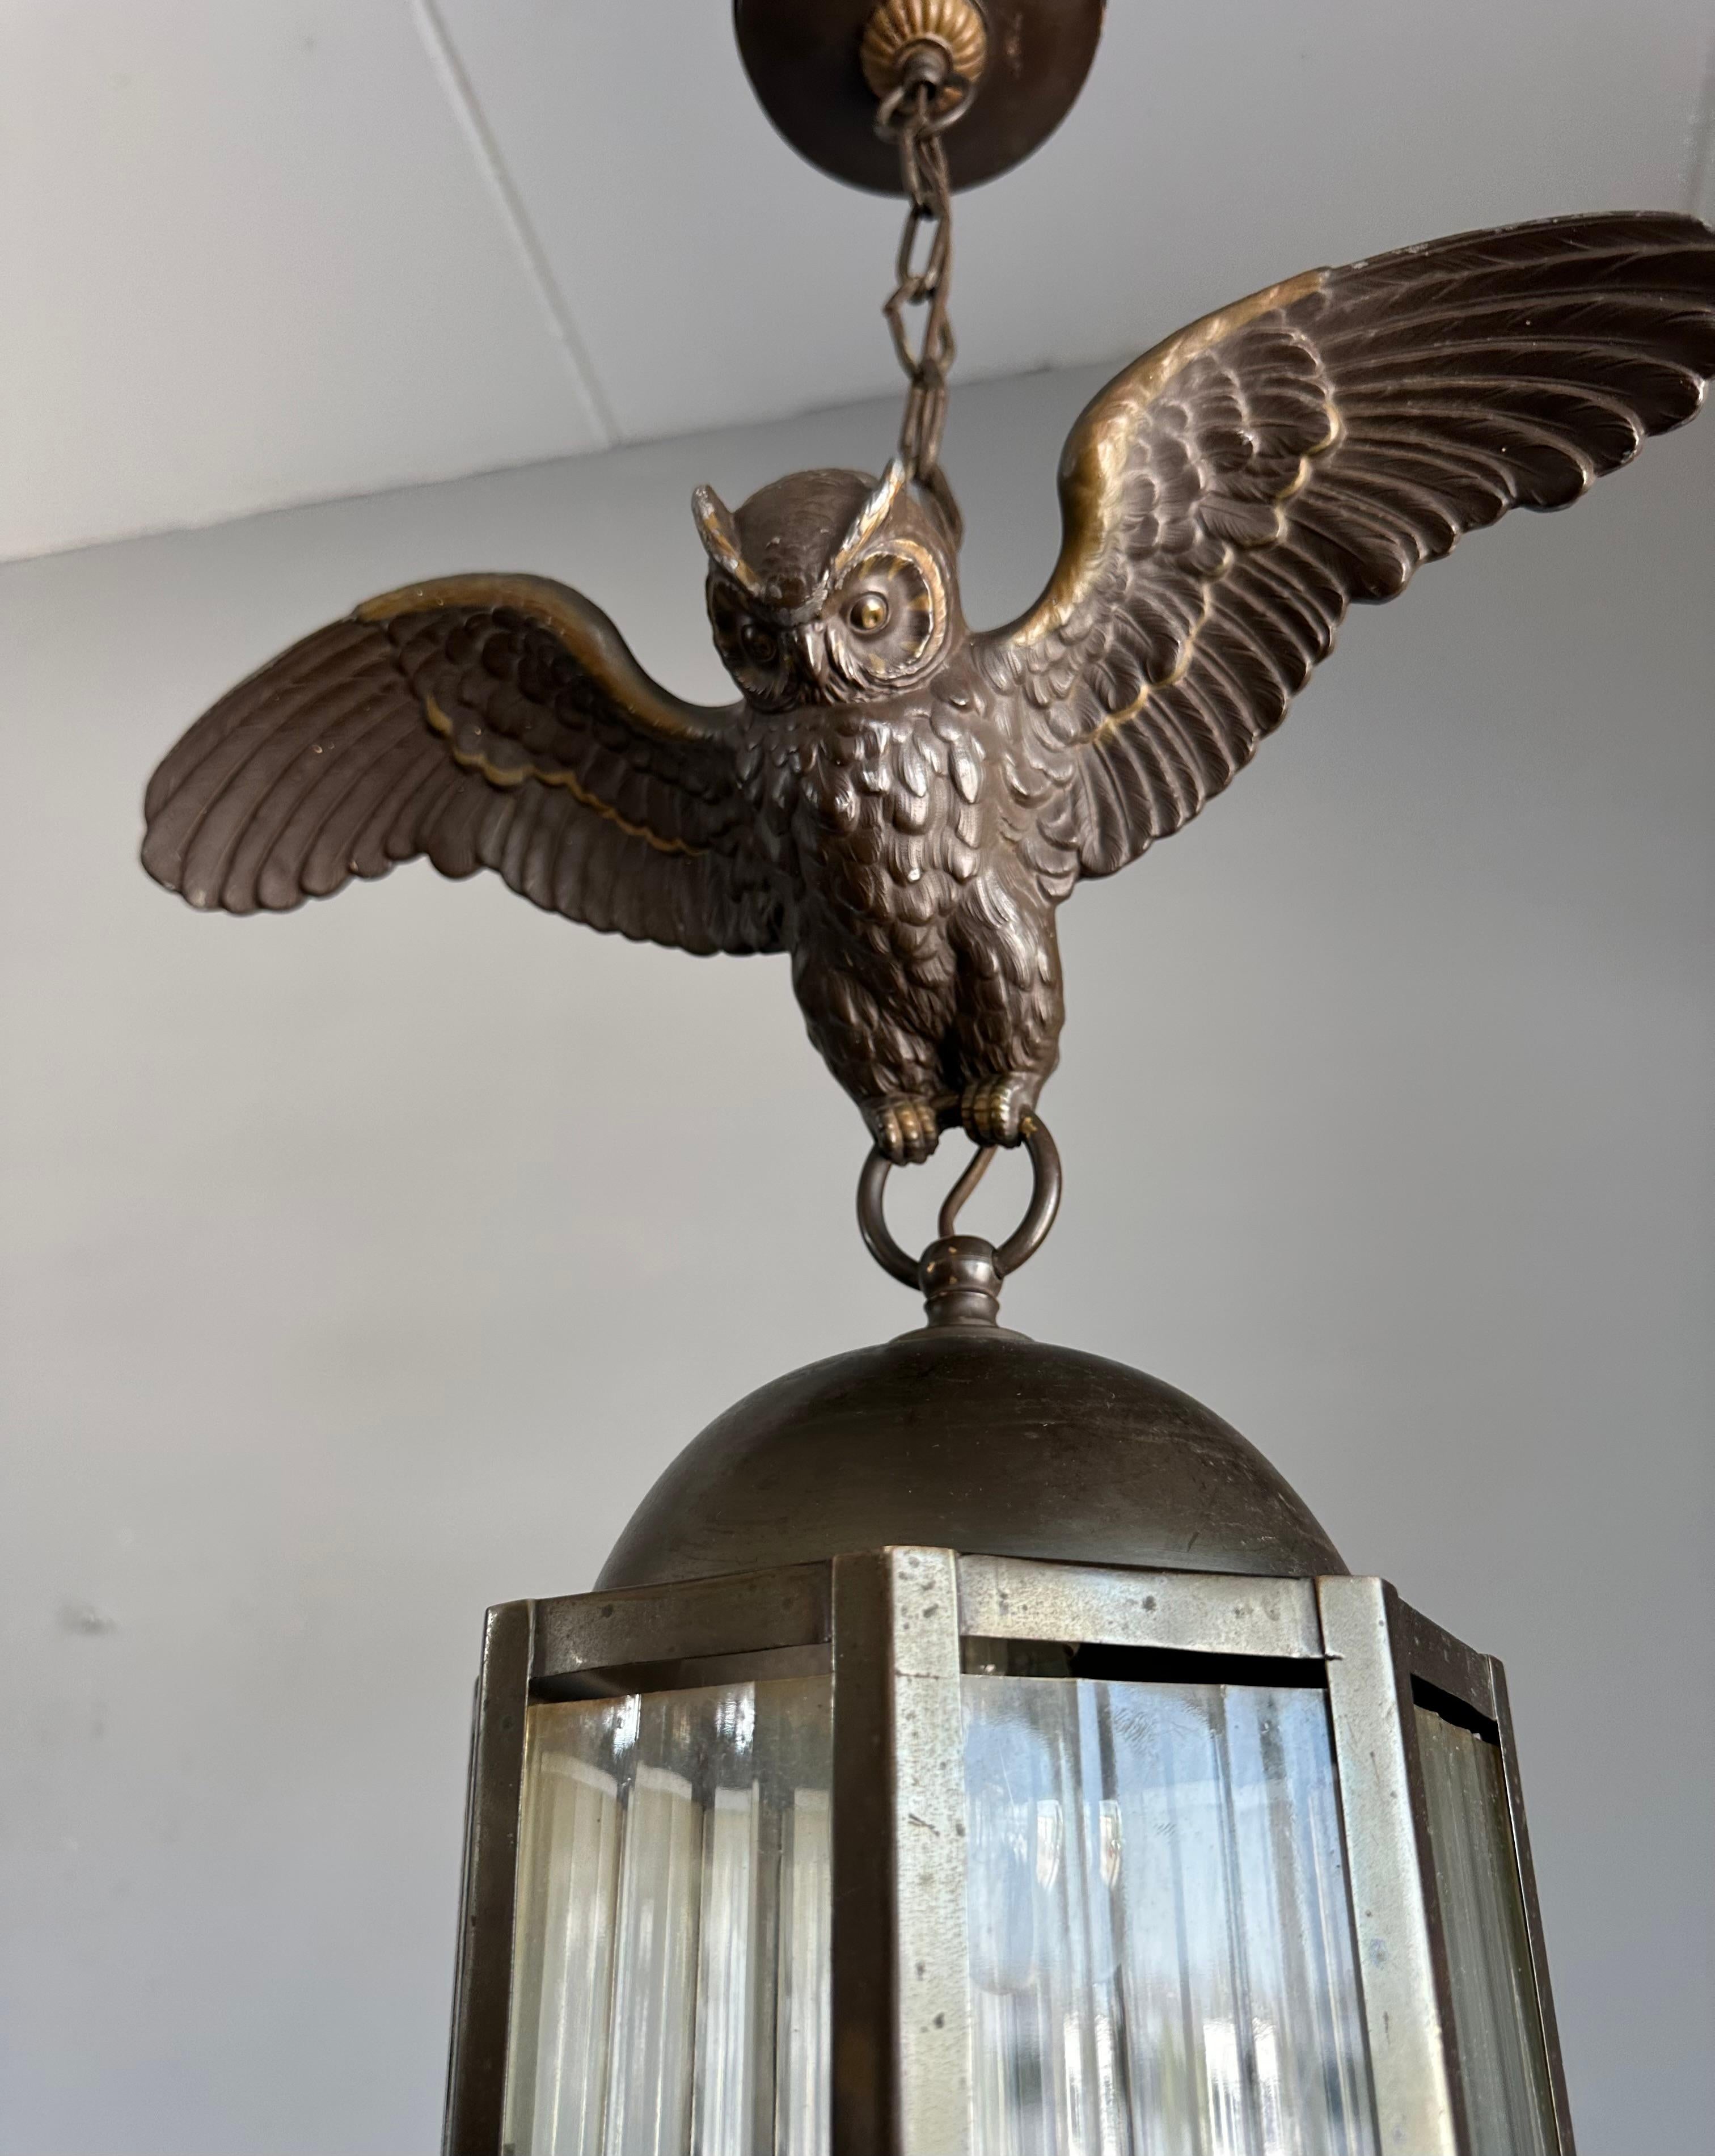 Arts and Crafts Era Flying Owl Sculpture Pendant Light or Lantern with Cut Glass In Good Condition For Sale In Lisse, NL